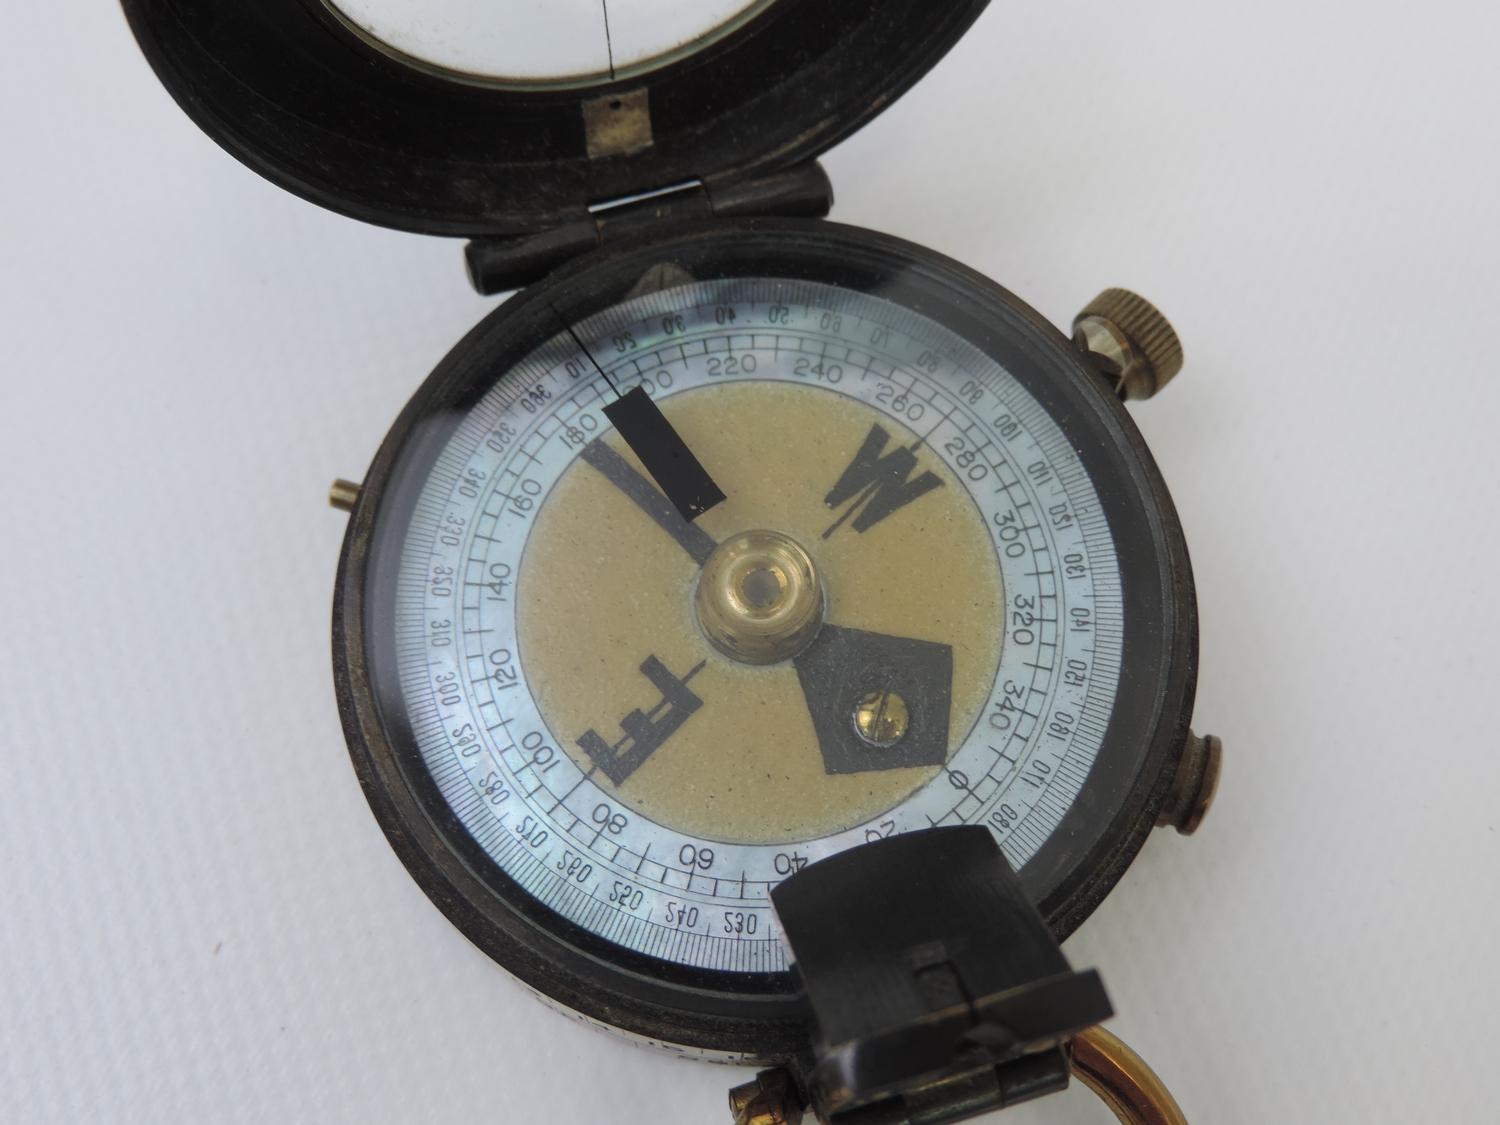 WWI Mother of Pearl Faced Compass - Hugh Rees London and Camberley - Image 2 of 6